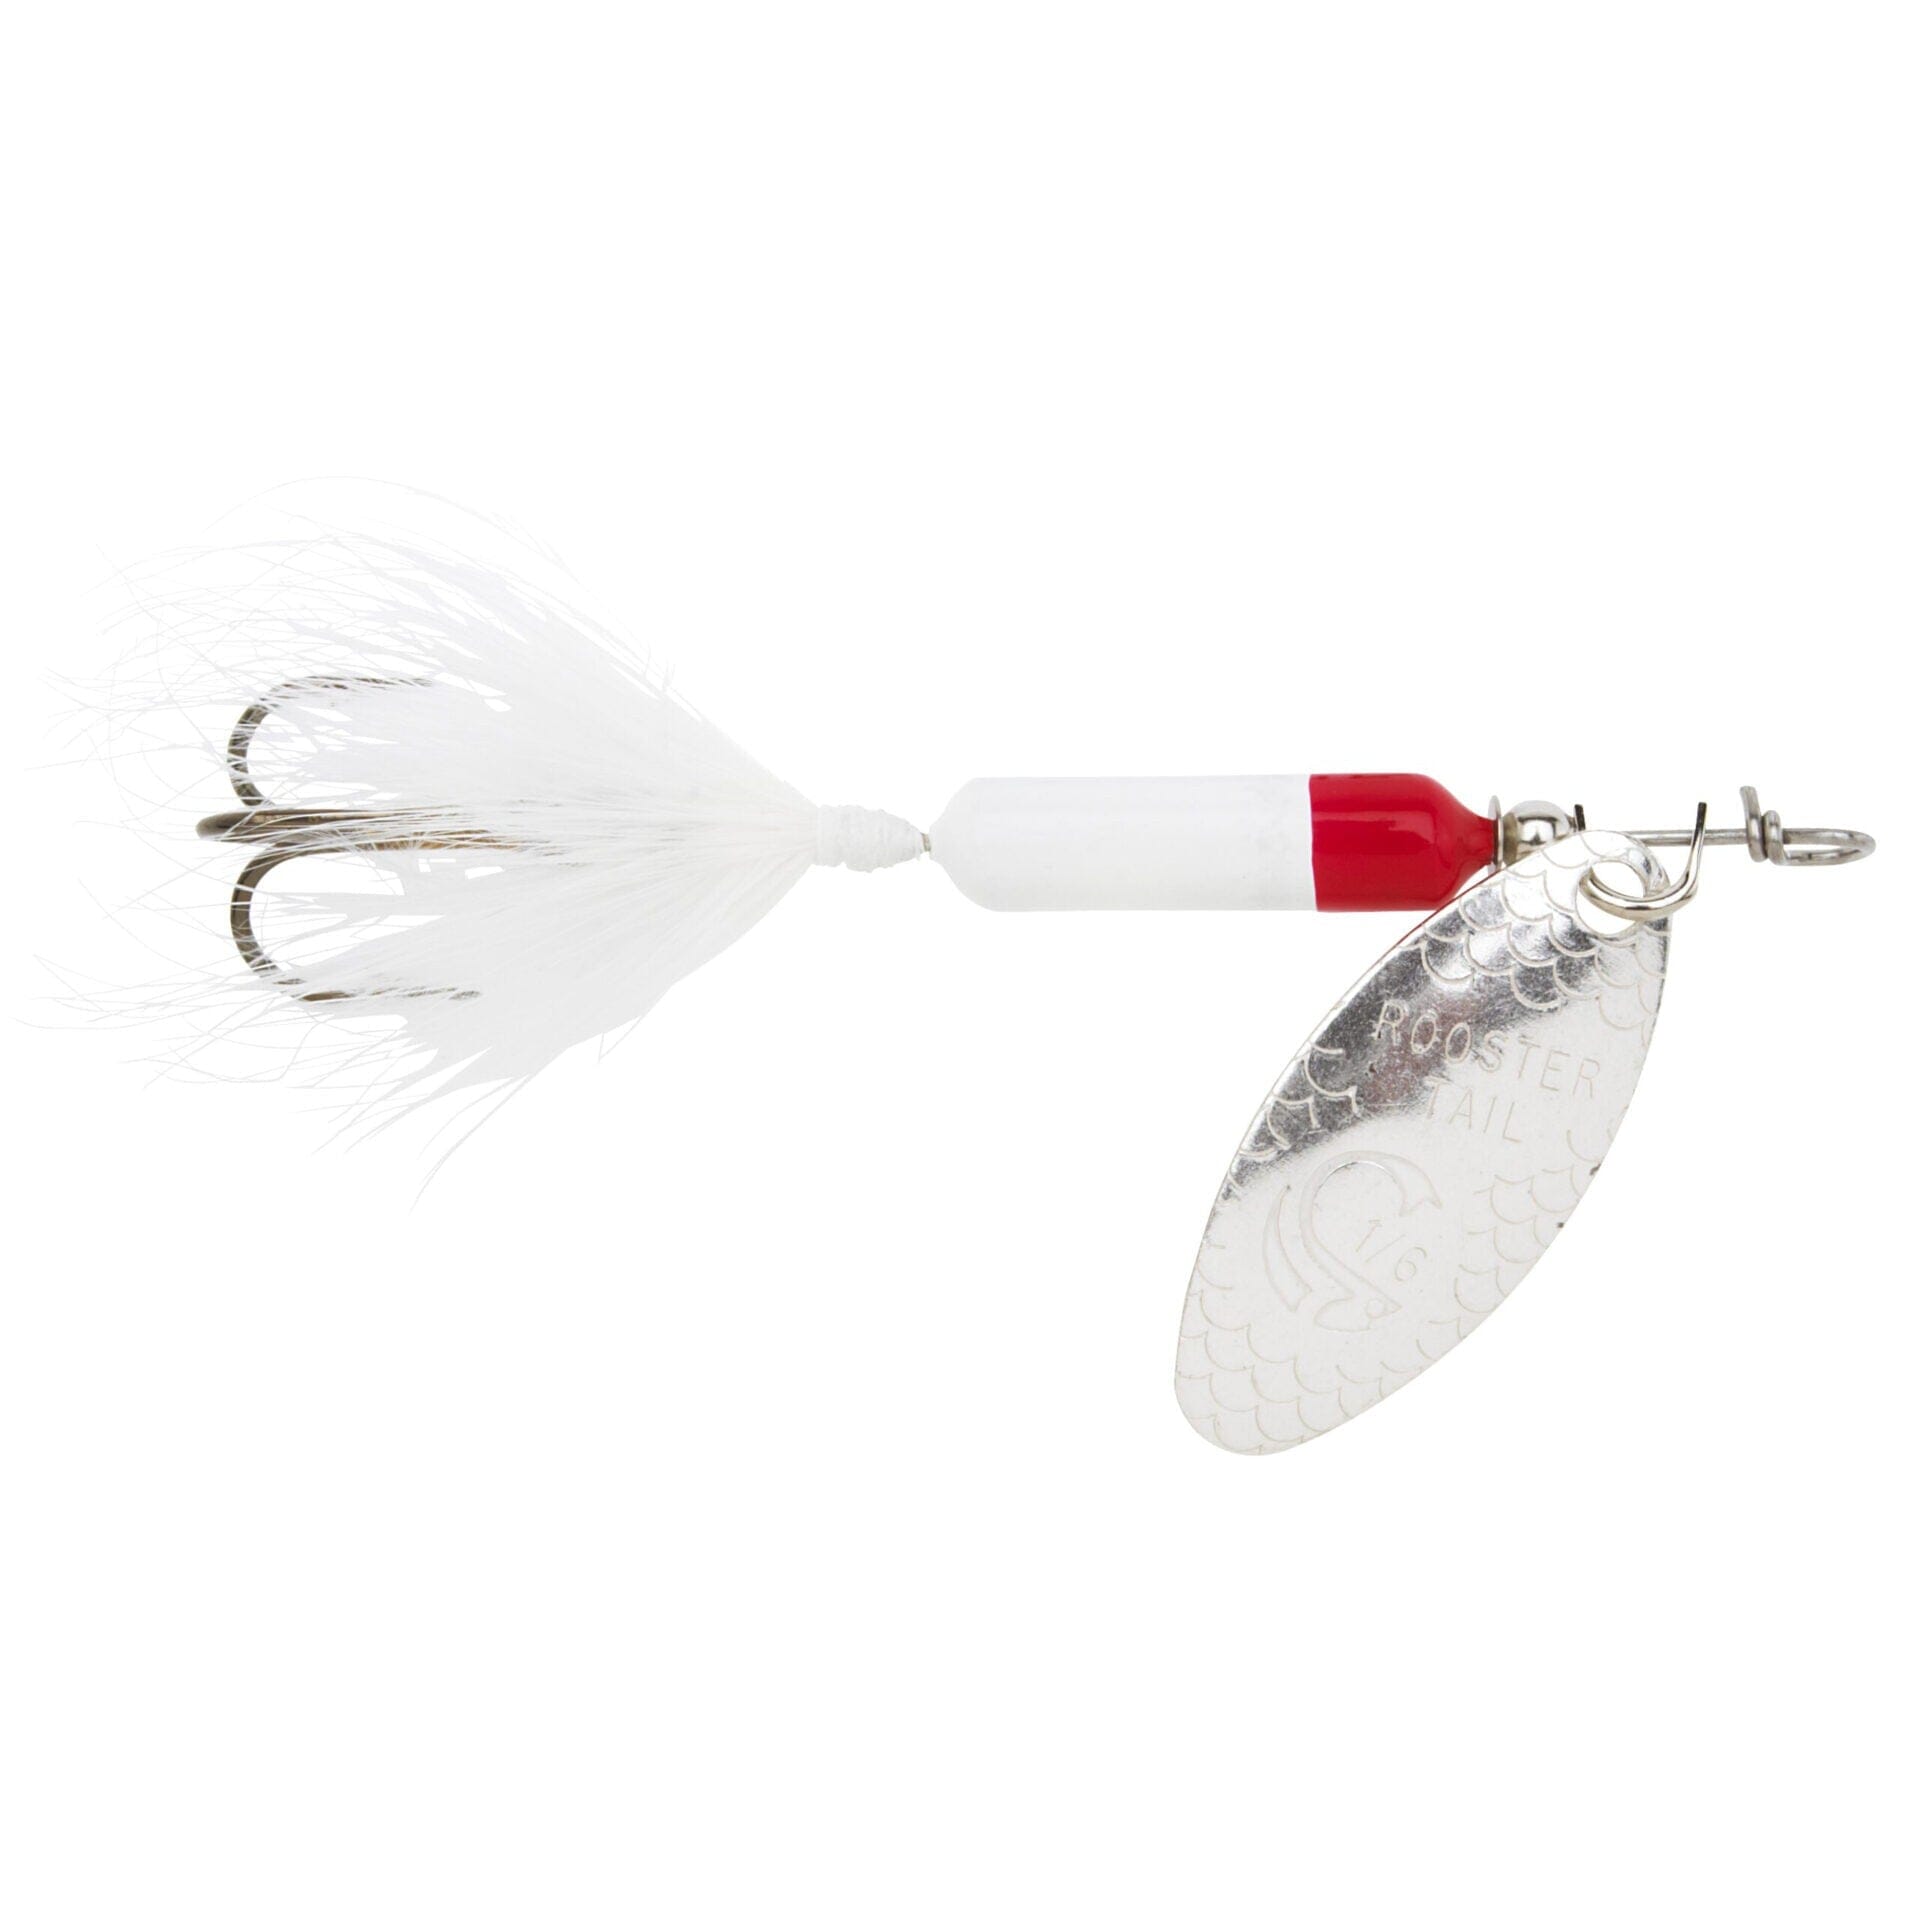 Worden's Original Rooster Tail White Red / 1/16 oz